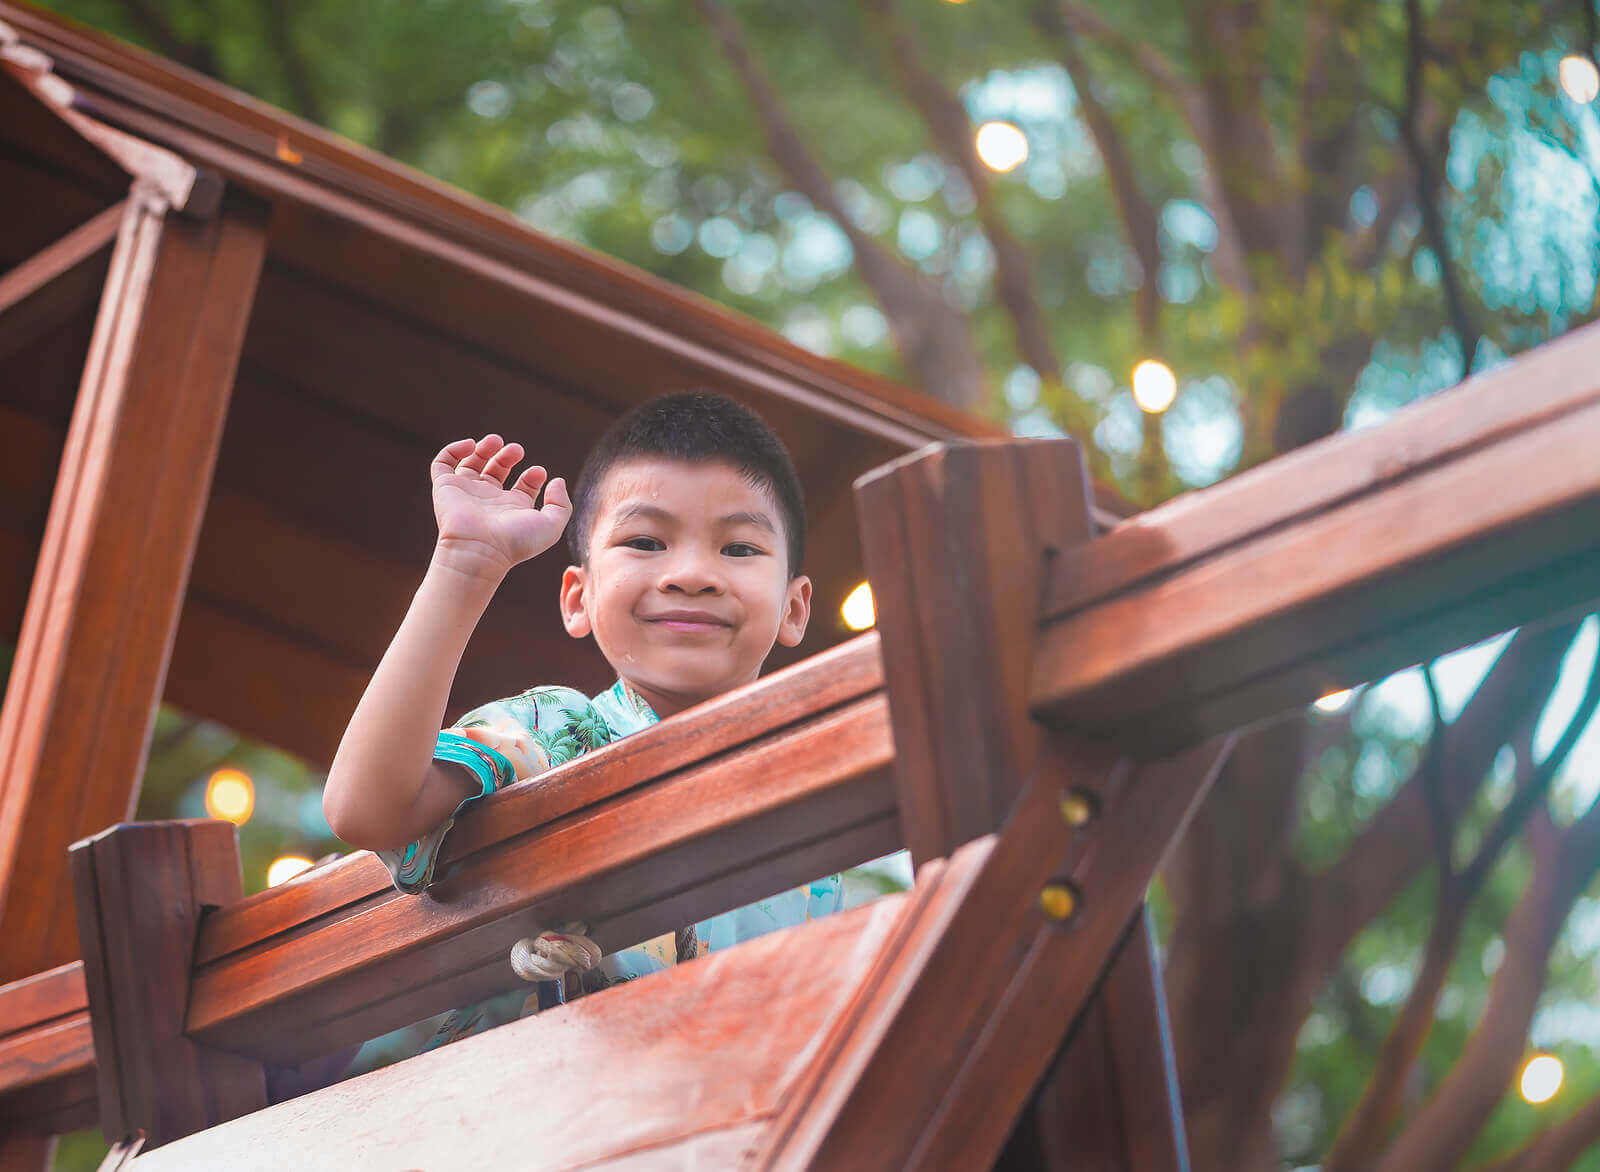 What Is Unstructured Play and Why Is It Important?